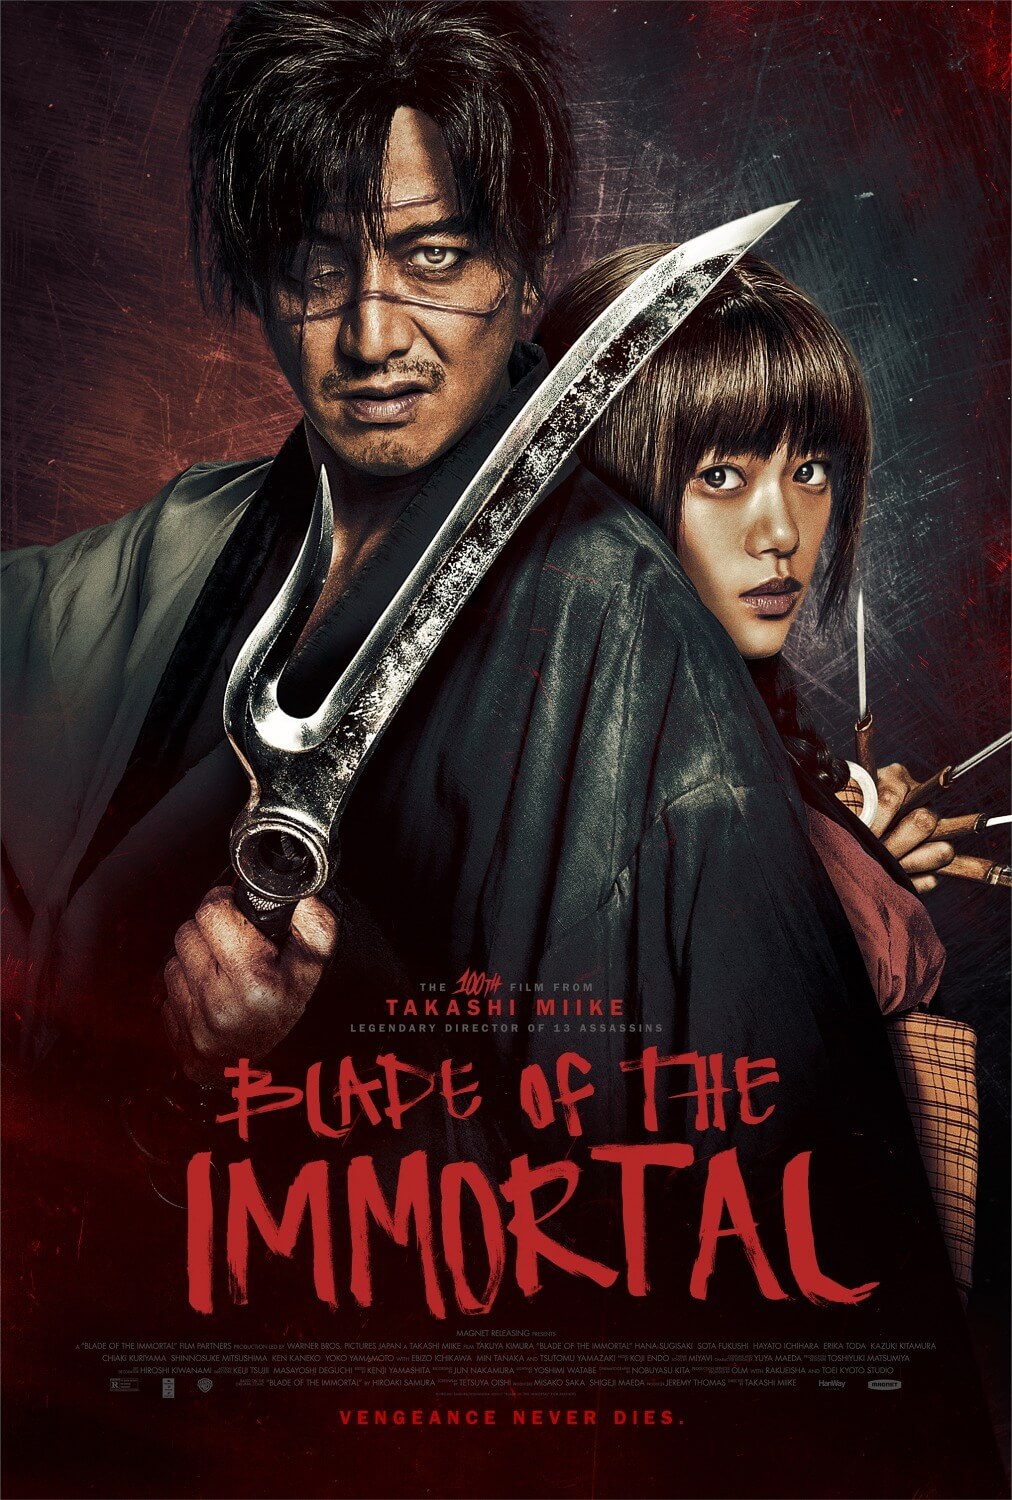 Blade-Of-The-Immortal